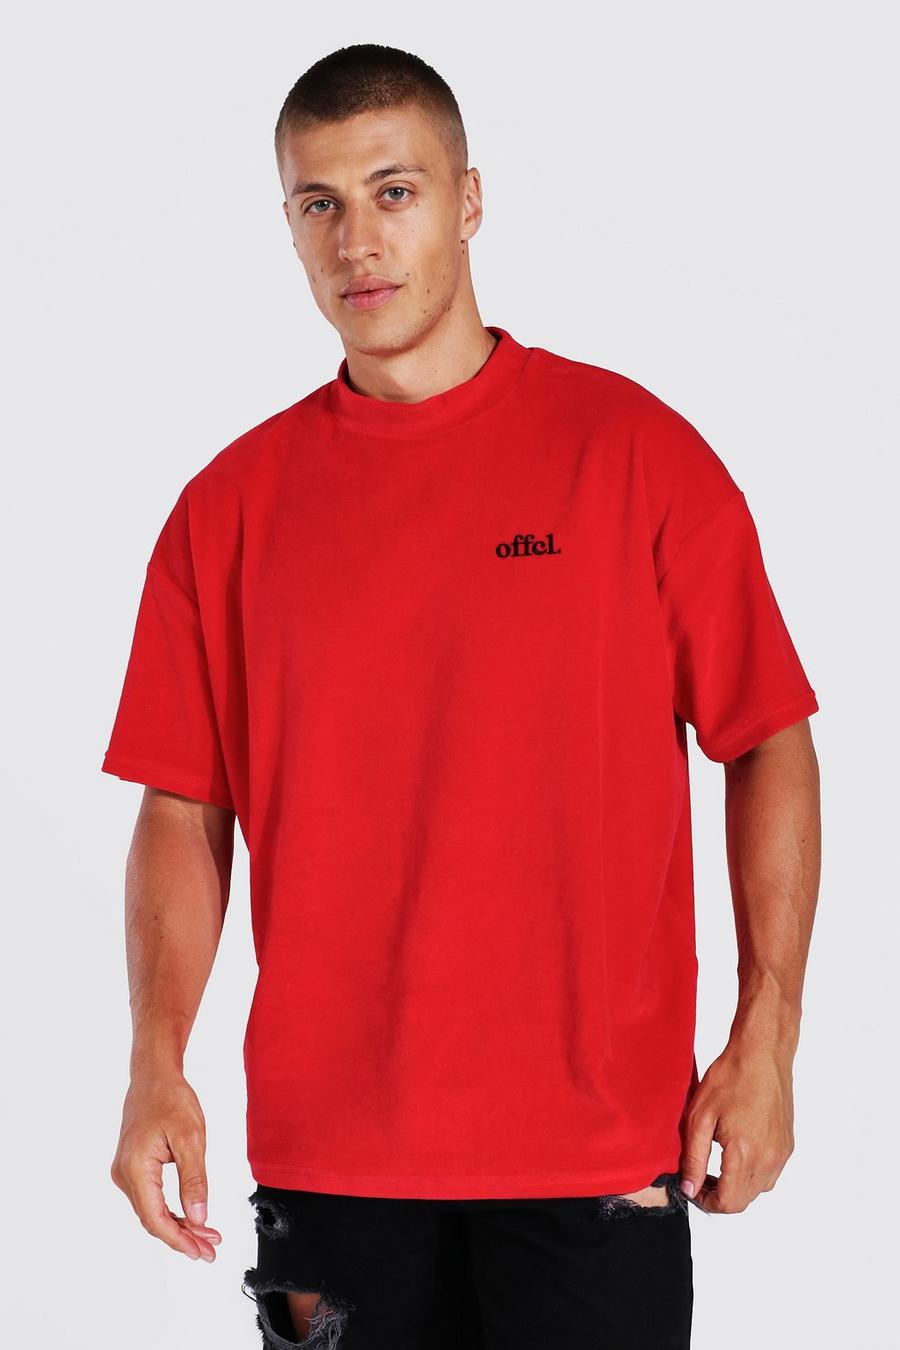 Red Oversized Offcl Velour Extended Neck T-shirt image number 1